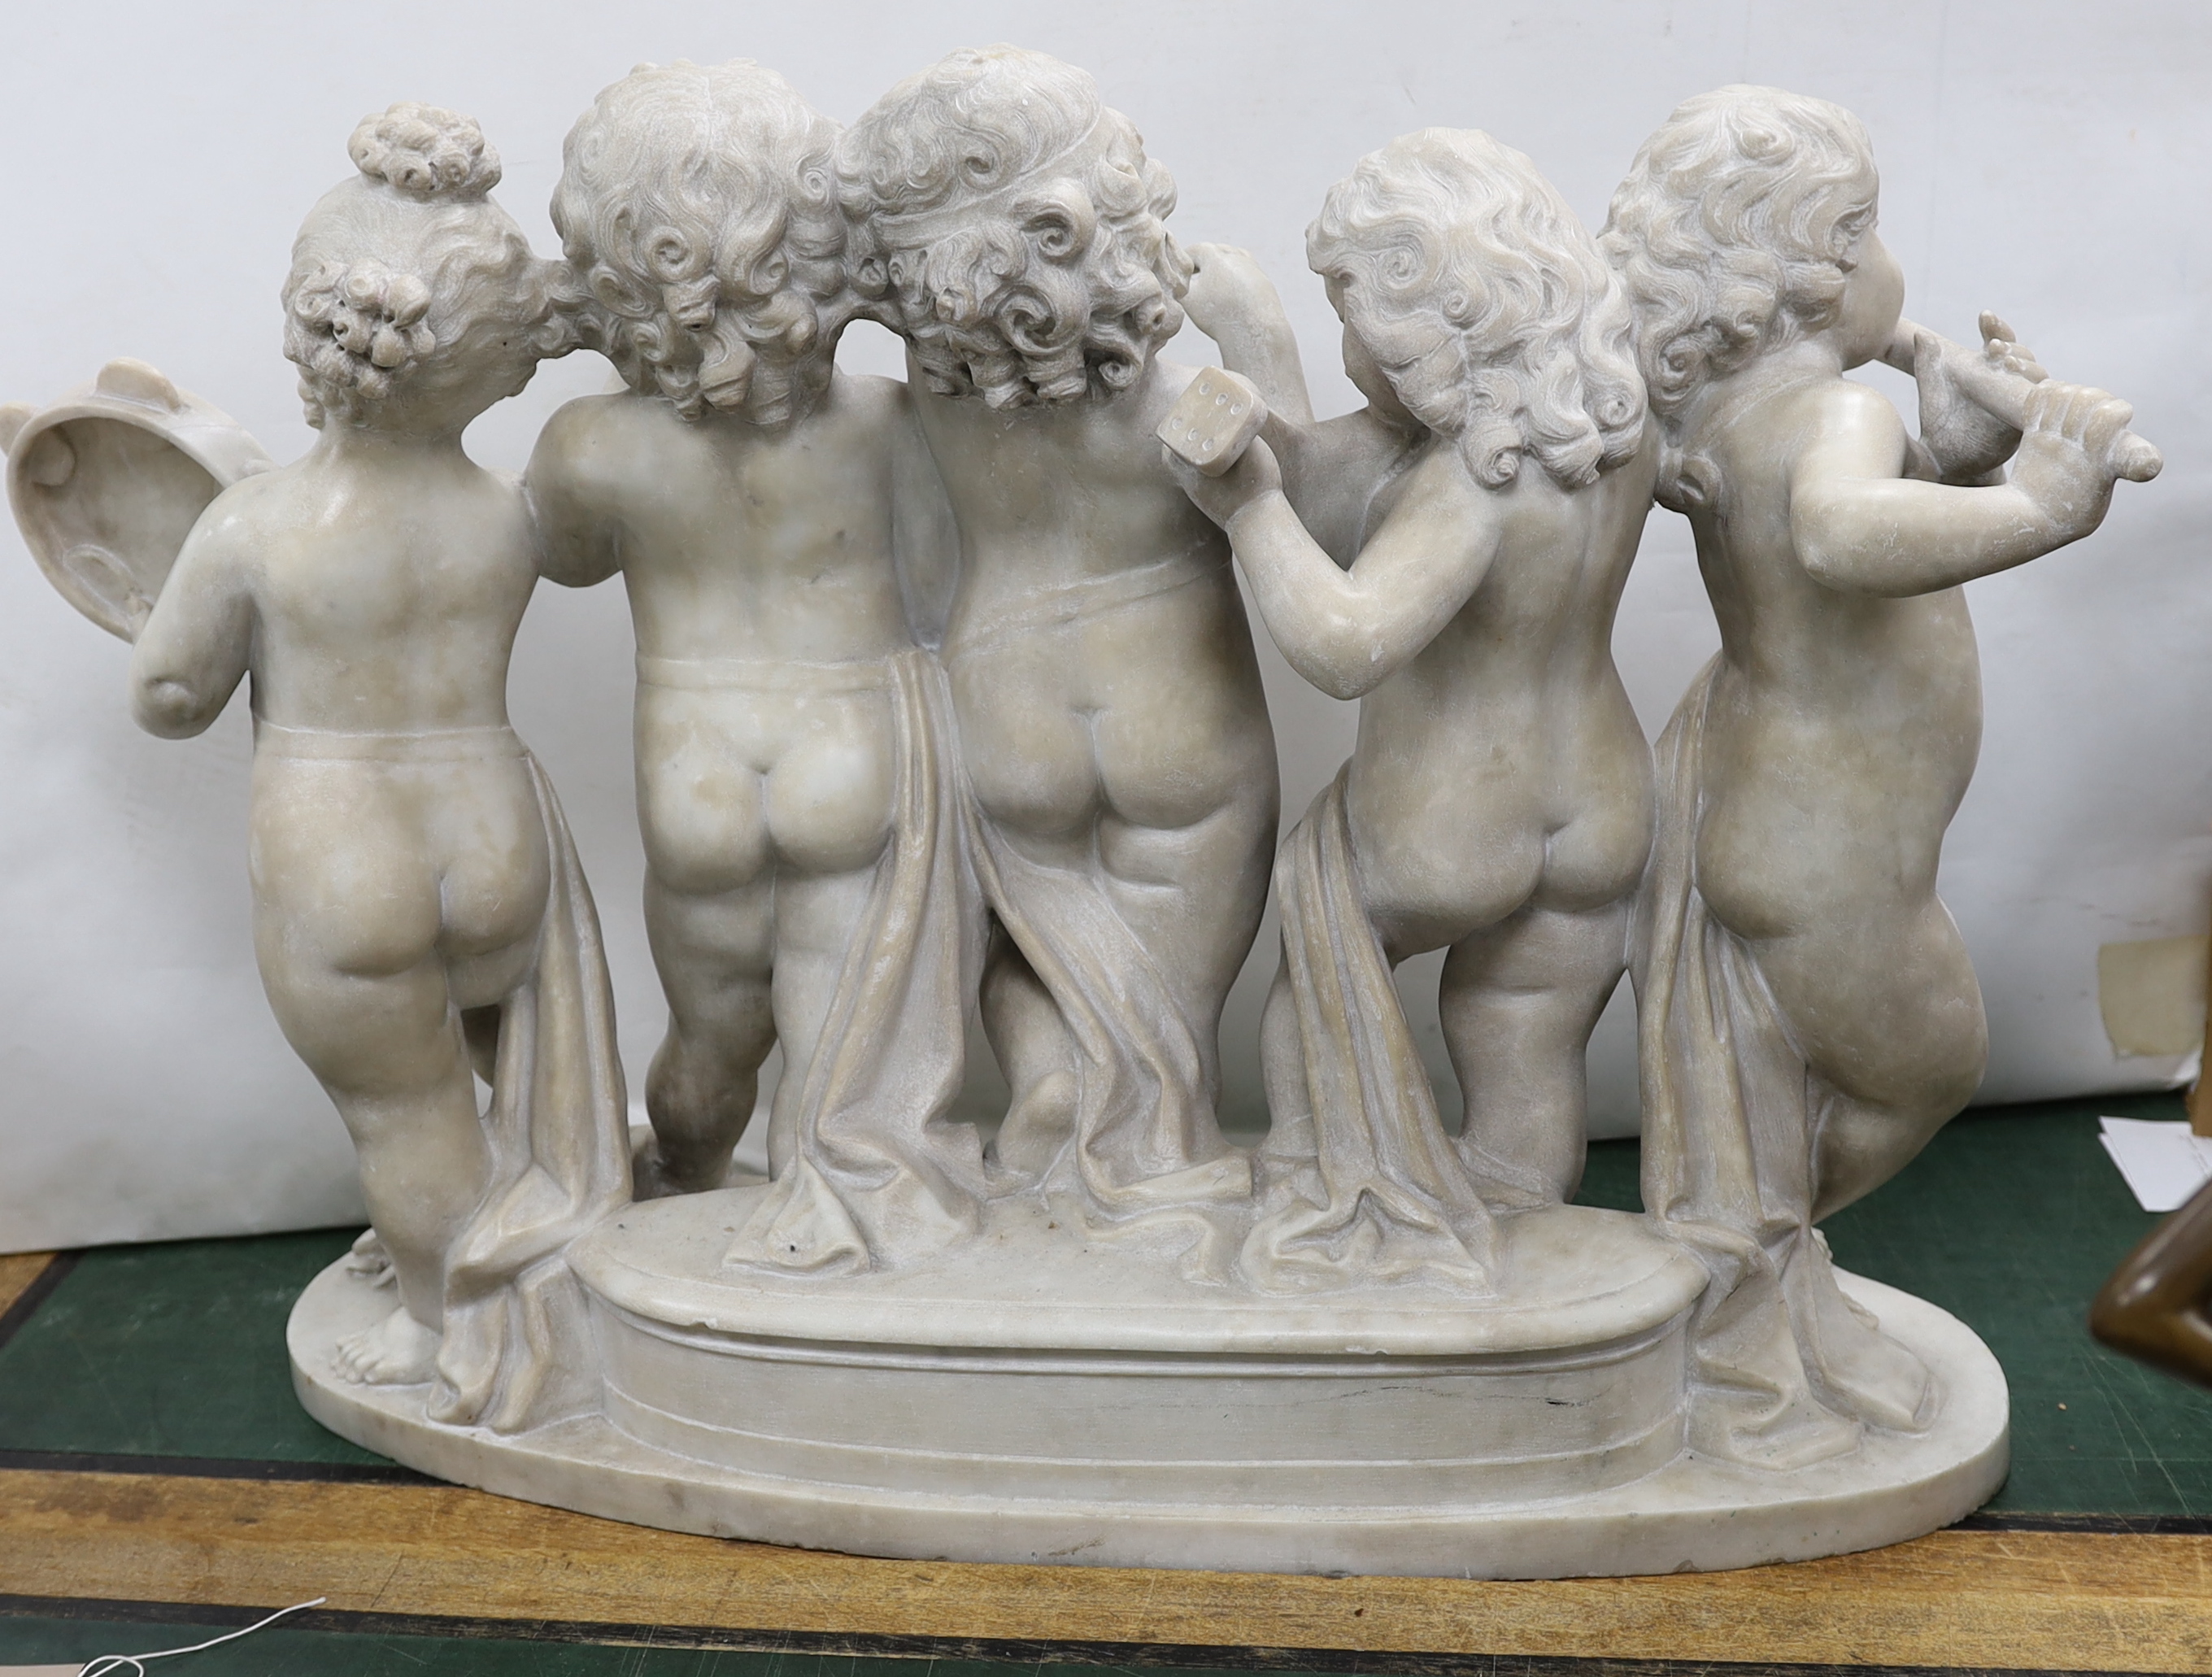 After the Ferdinando Vichi Gallery, an Italian white Carrara marble group 'Musica', 82cm wide, 63cm high, Please note this lot attracts an additional import tax of 5% on the hammer price